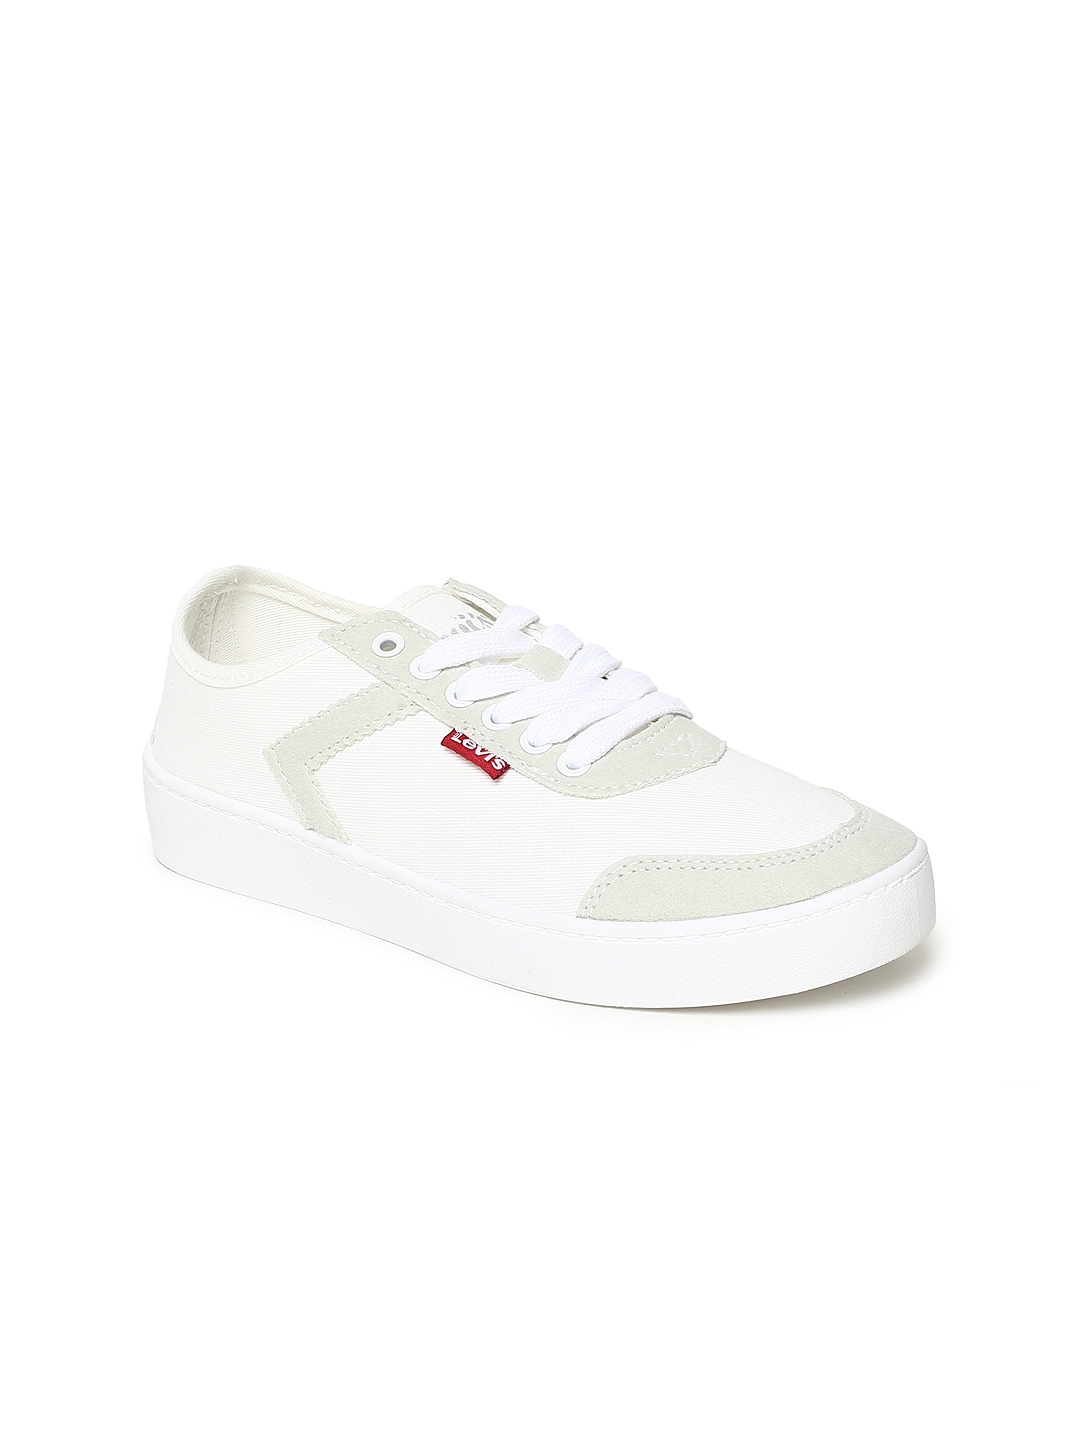 Buy Levis Women White Sneakers - Casual Shoes for Women 9036005 | Myntra